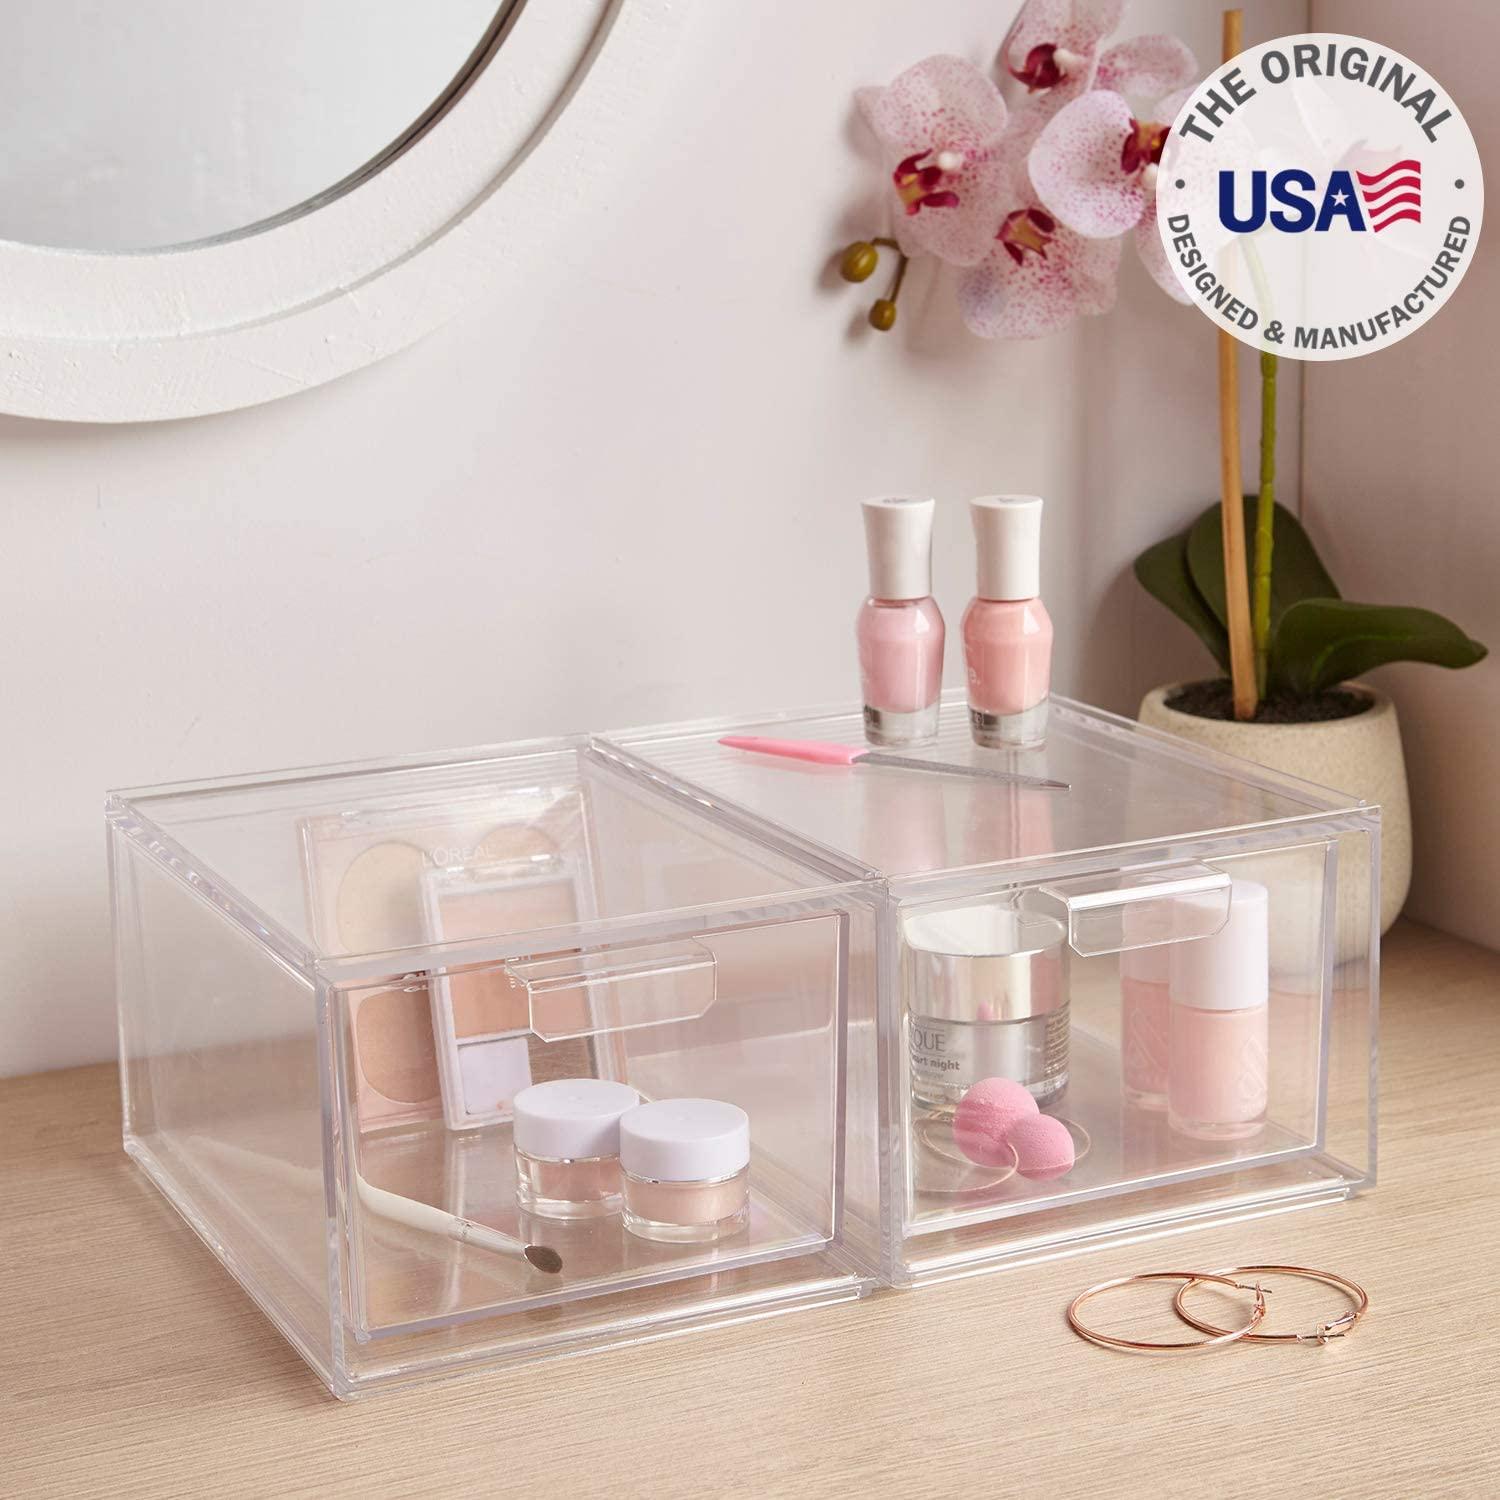 STORi Audrey Stackable Bin Clear Plastic Organizer Drawers, 2 Piece Set, Organize Cosmetics and Beauty Supplies on a Vanity, Made in USA